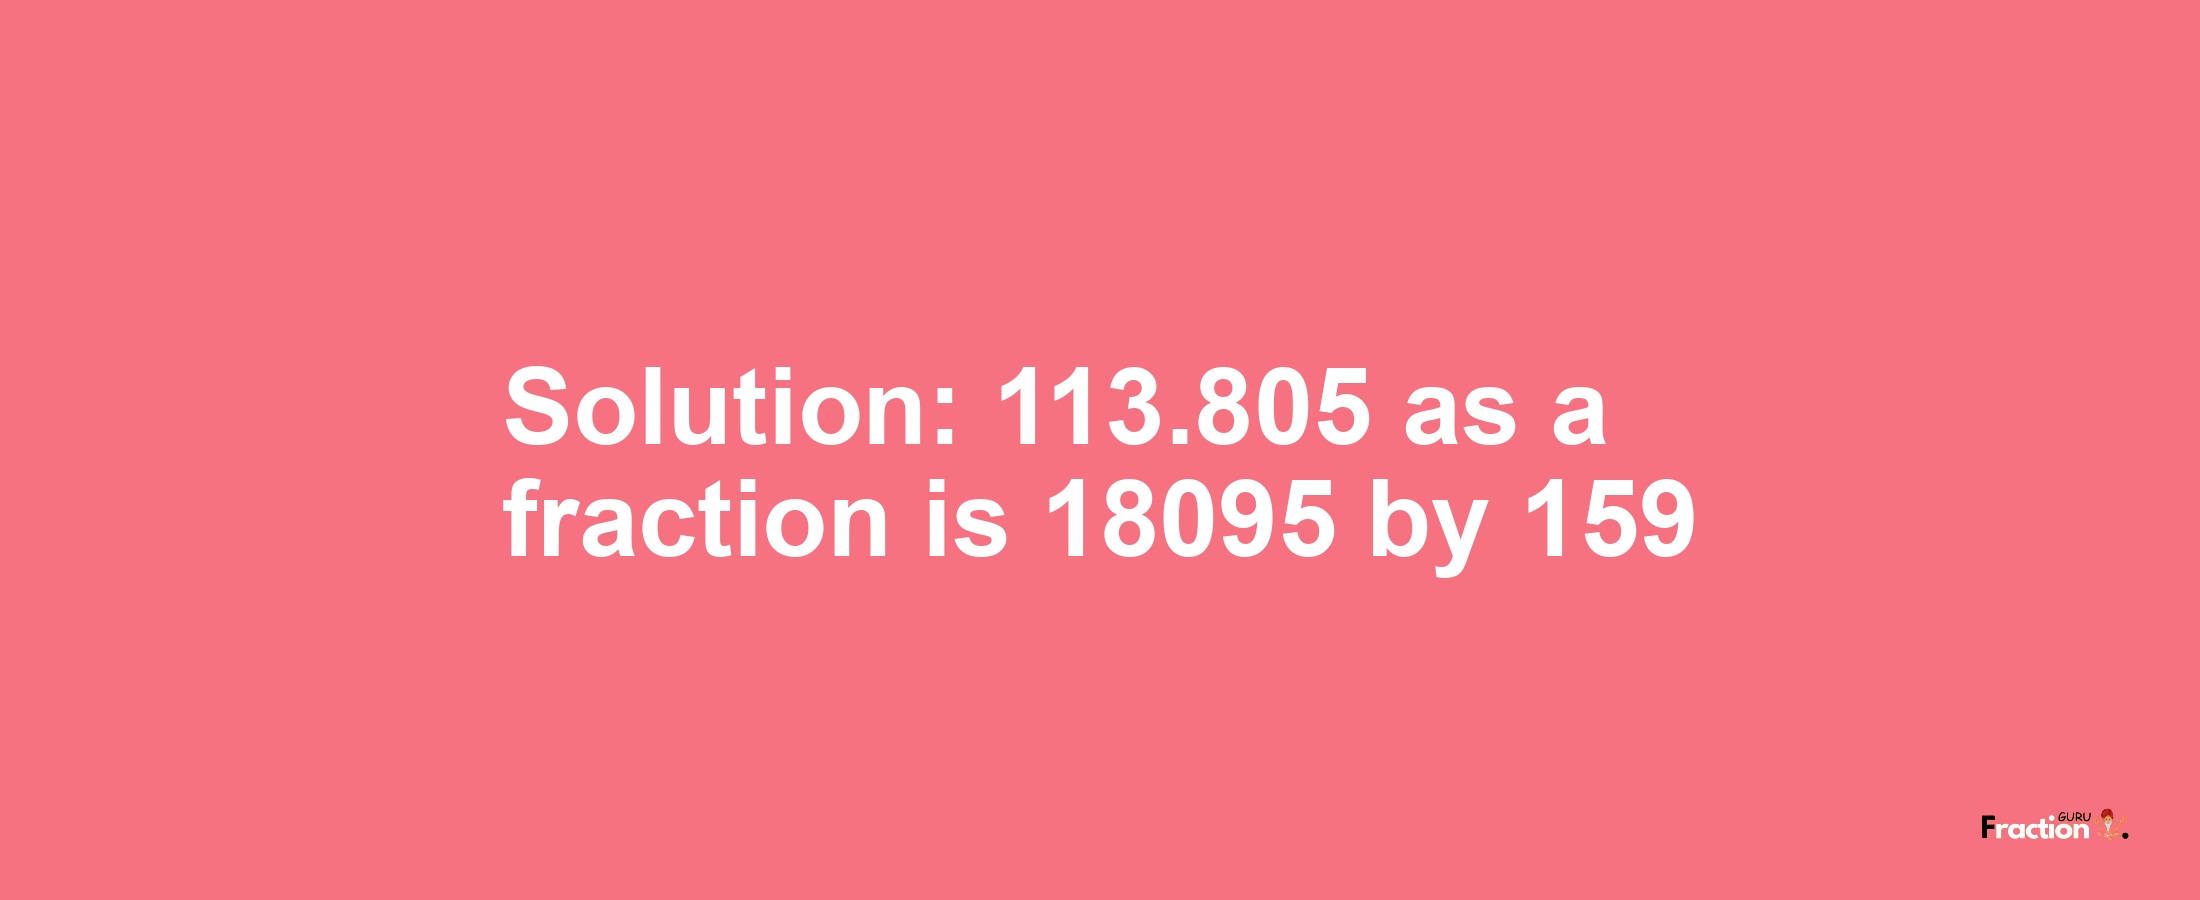 Solution:113.805 as a fraction is 18095/159